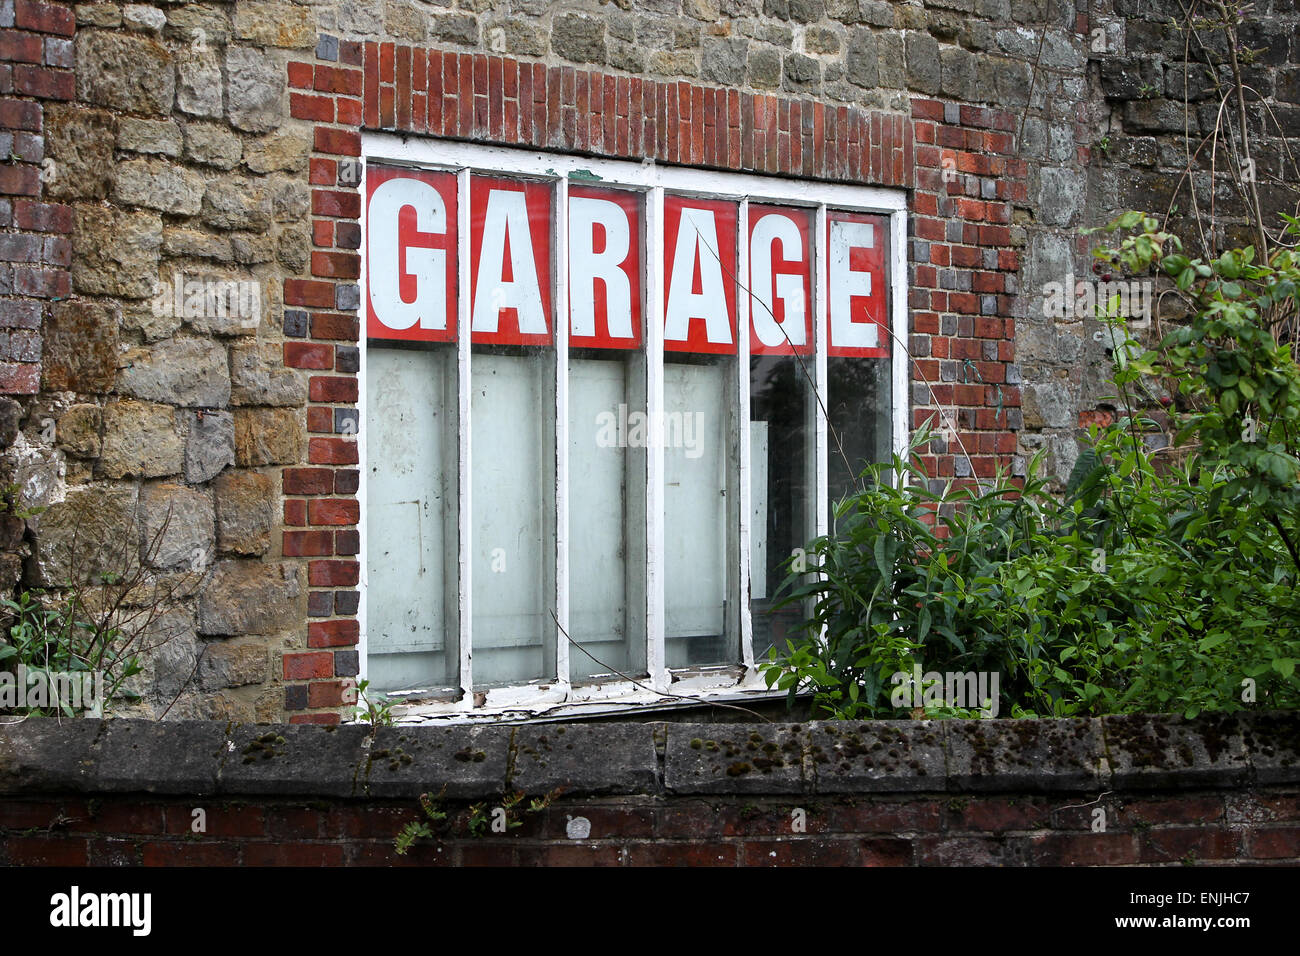 Old fashioned car garage sign in Petworth, West Sussex, UK. Stock Photo